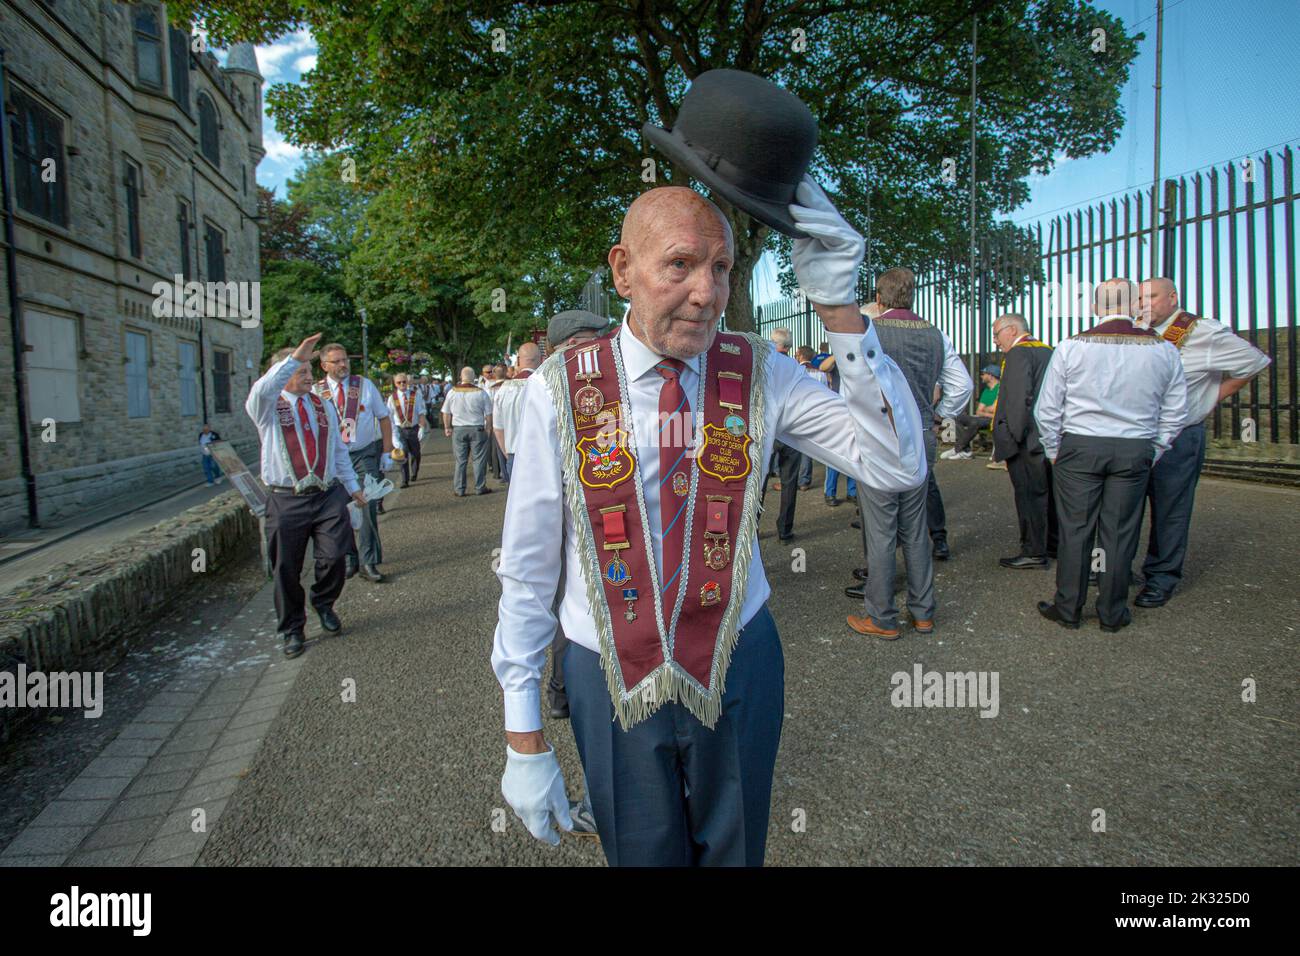 13 August 2022, Londonderry. 10,000 Apprentice Boys of Derry and 120 bands took part in the annual Relief of Derry parade, the largest Loyal order par Stock Photo